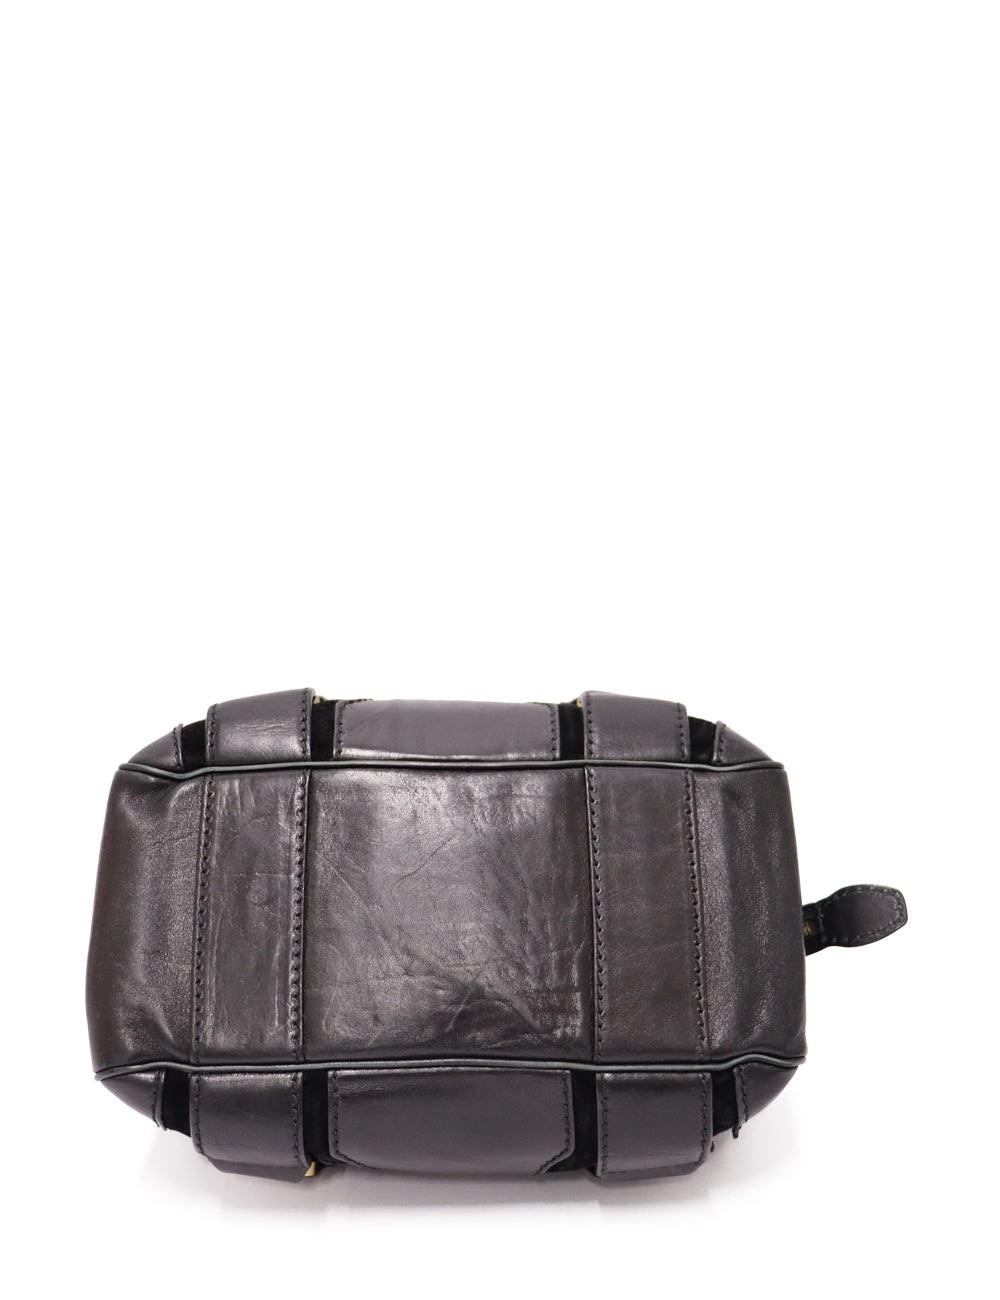 Jimmy Choo Vintage Black Leather and Suede Shoulder Bag In Good Condition For Sale In Amman, JO